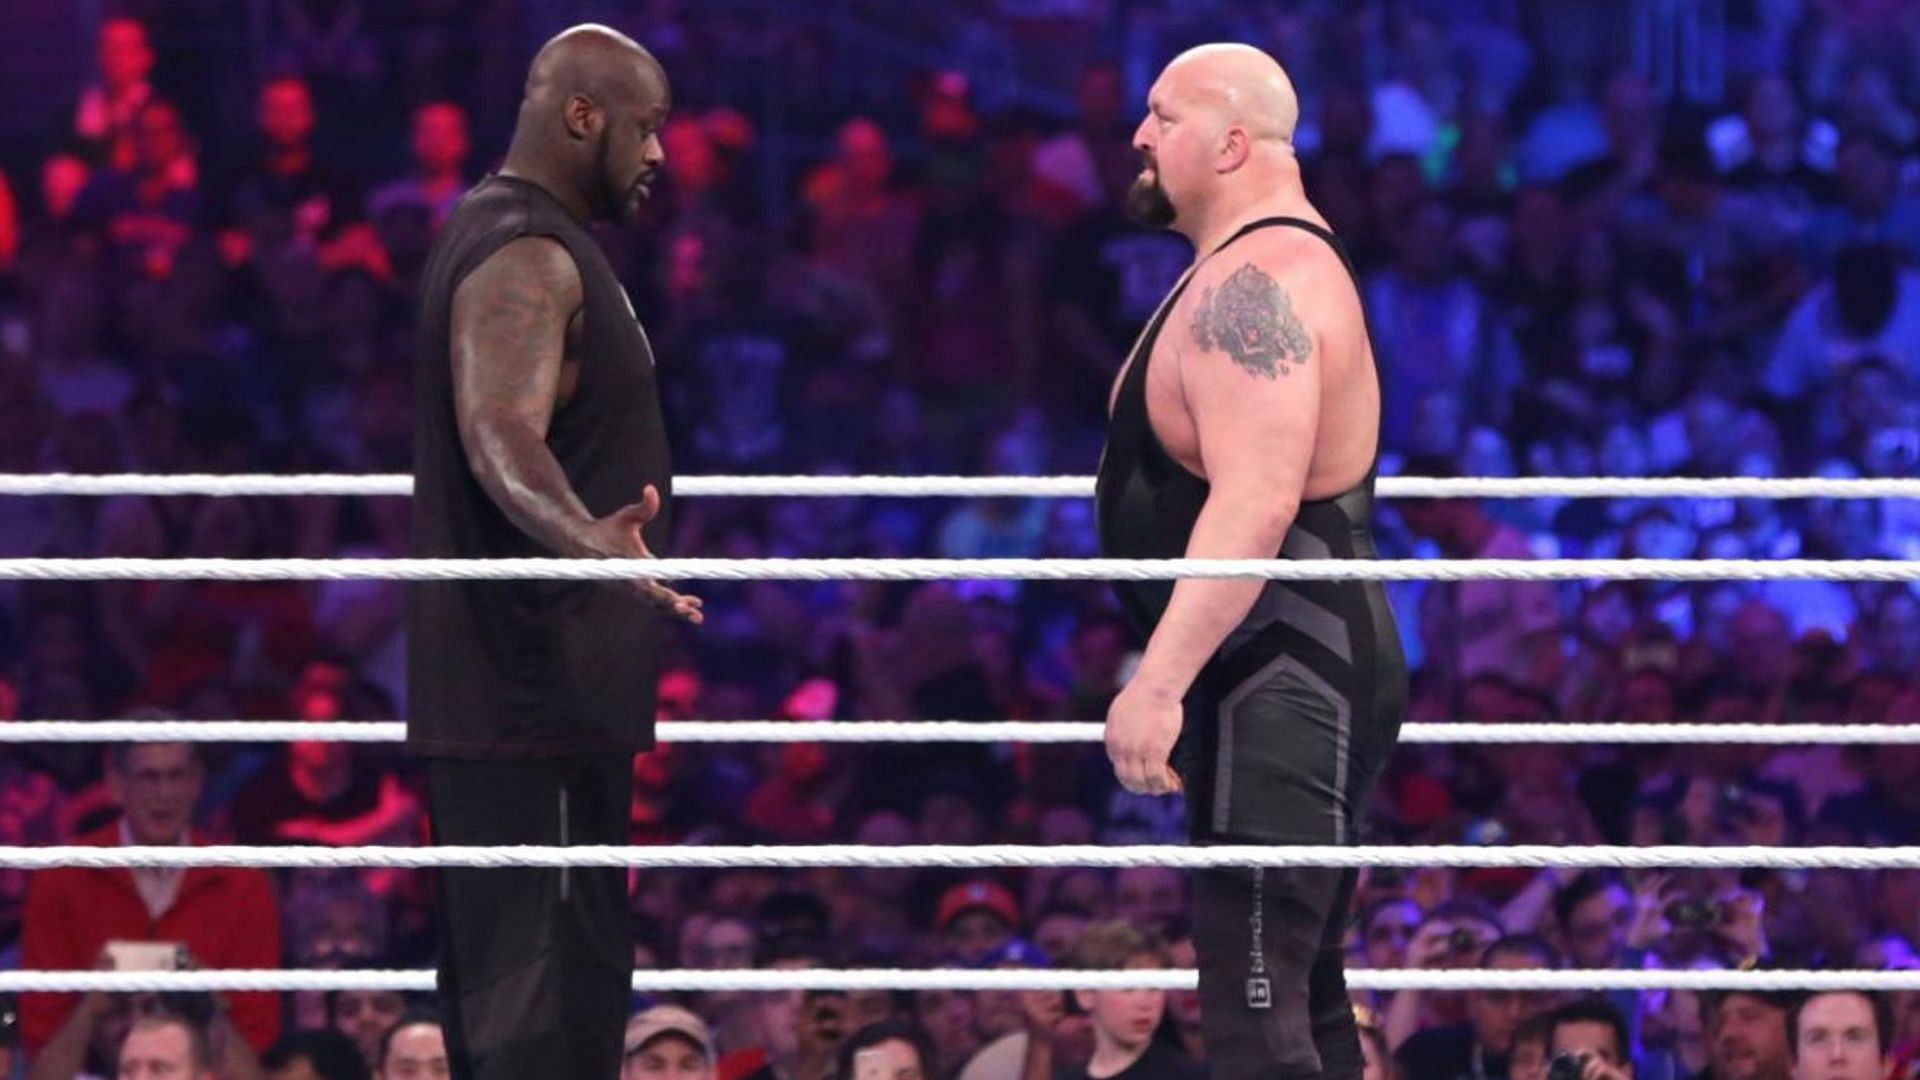 Shaq and Paul Wight came face-to-face at WrestleMania